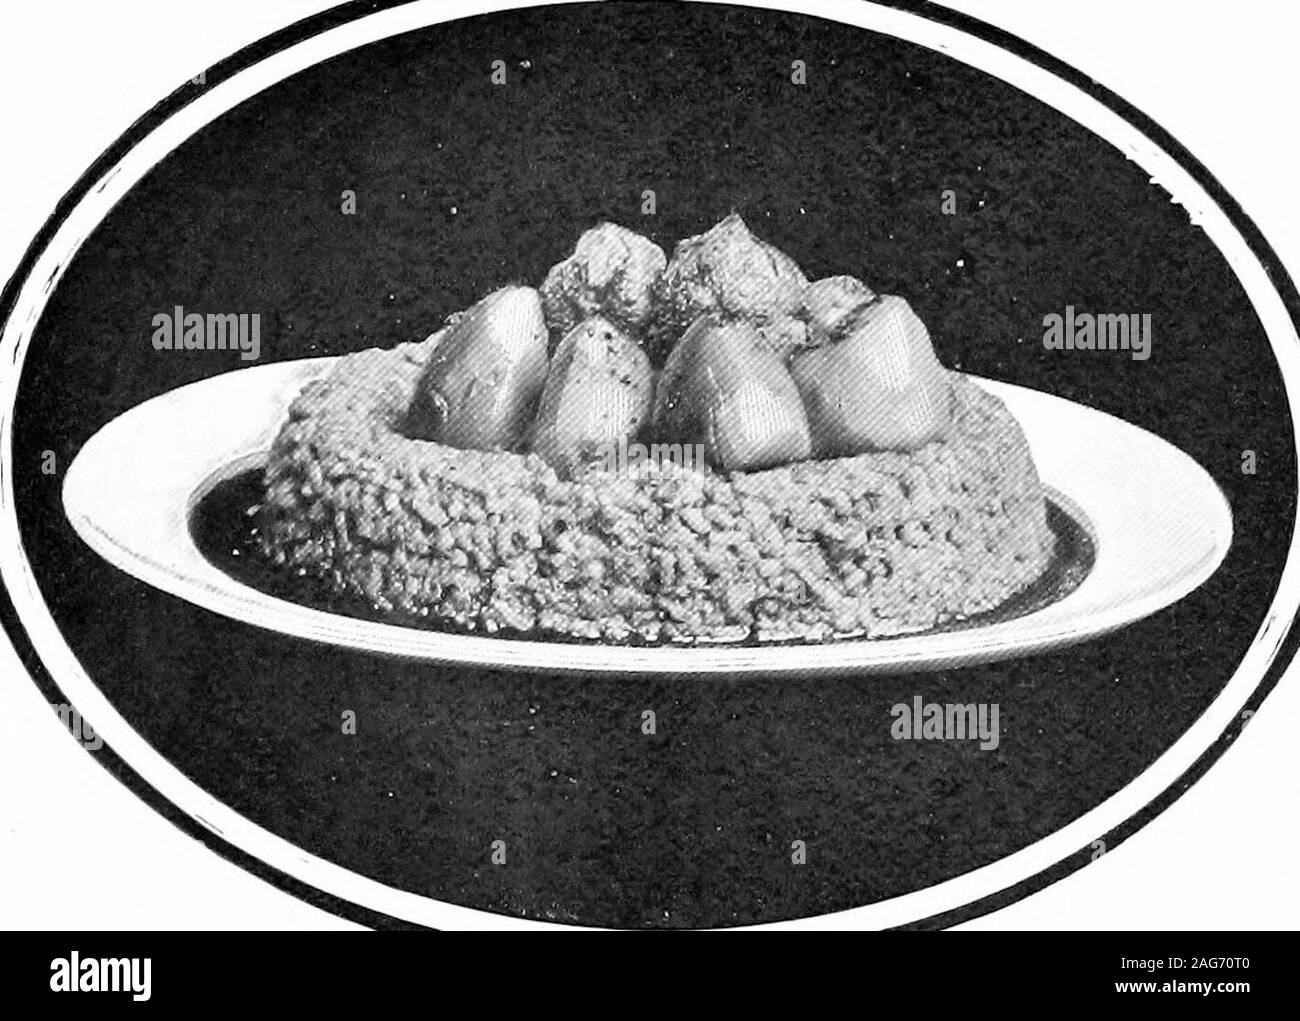 Clarified butter Black and White Stock Photos & Images - Alamy